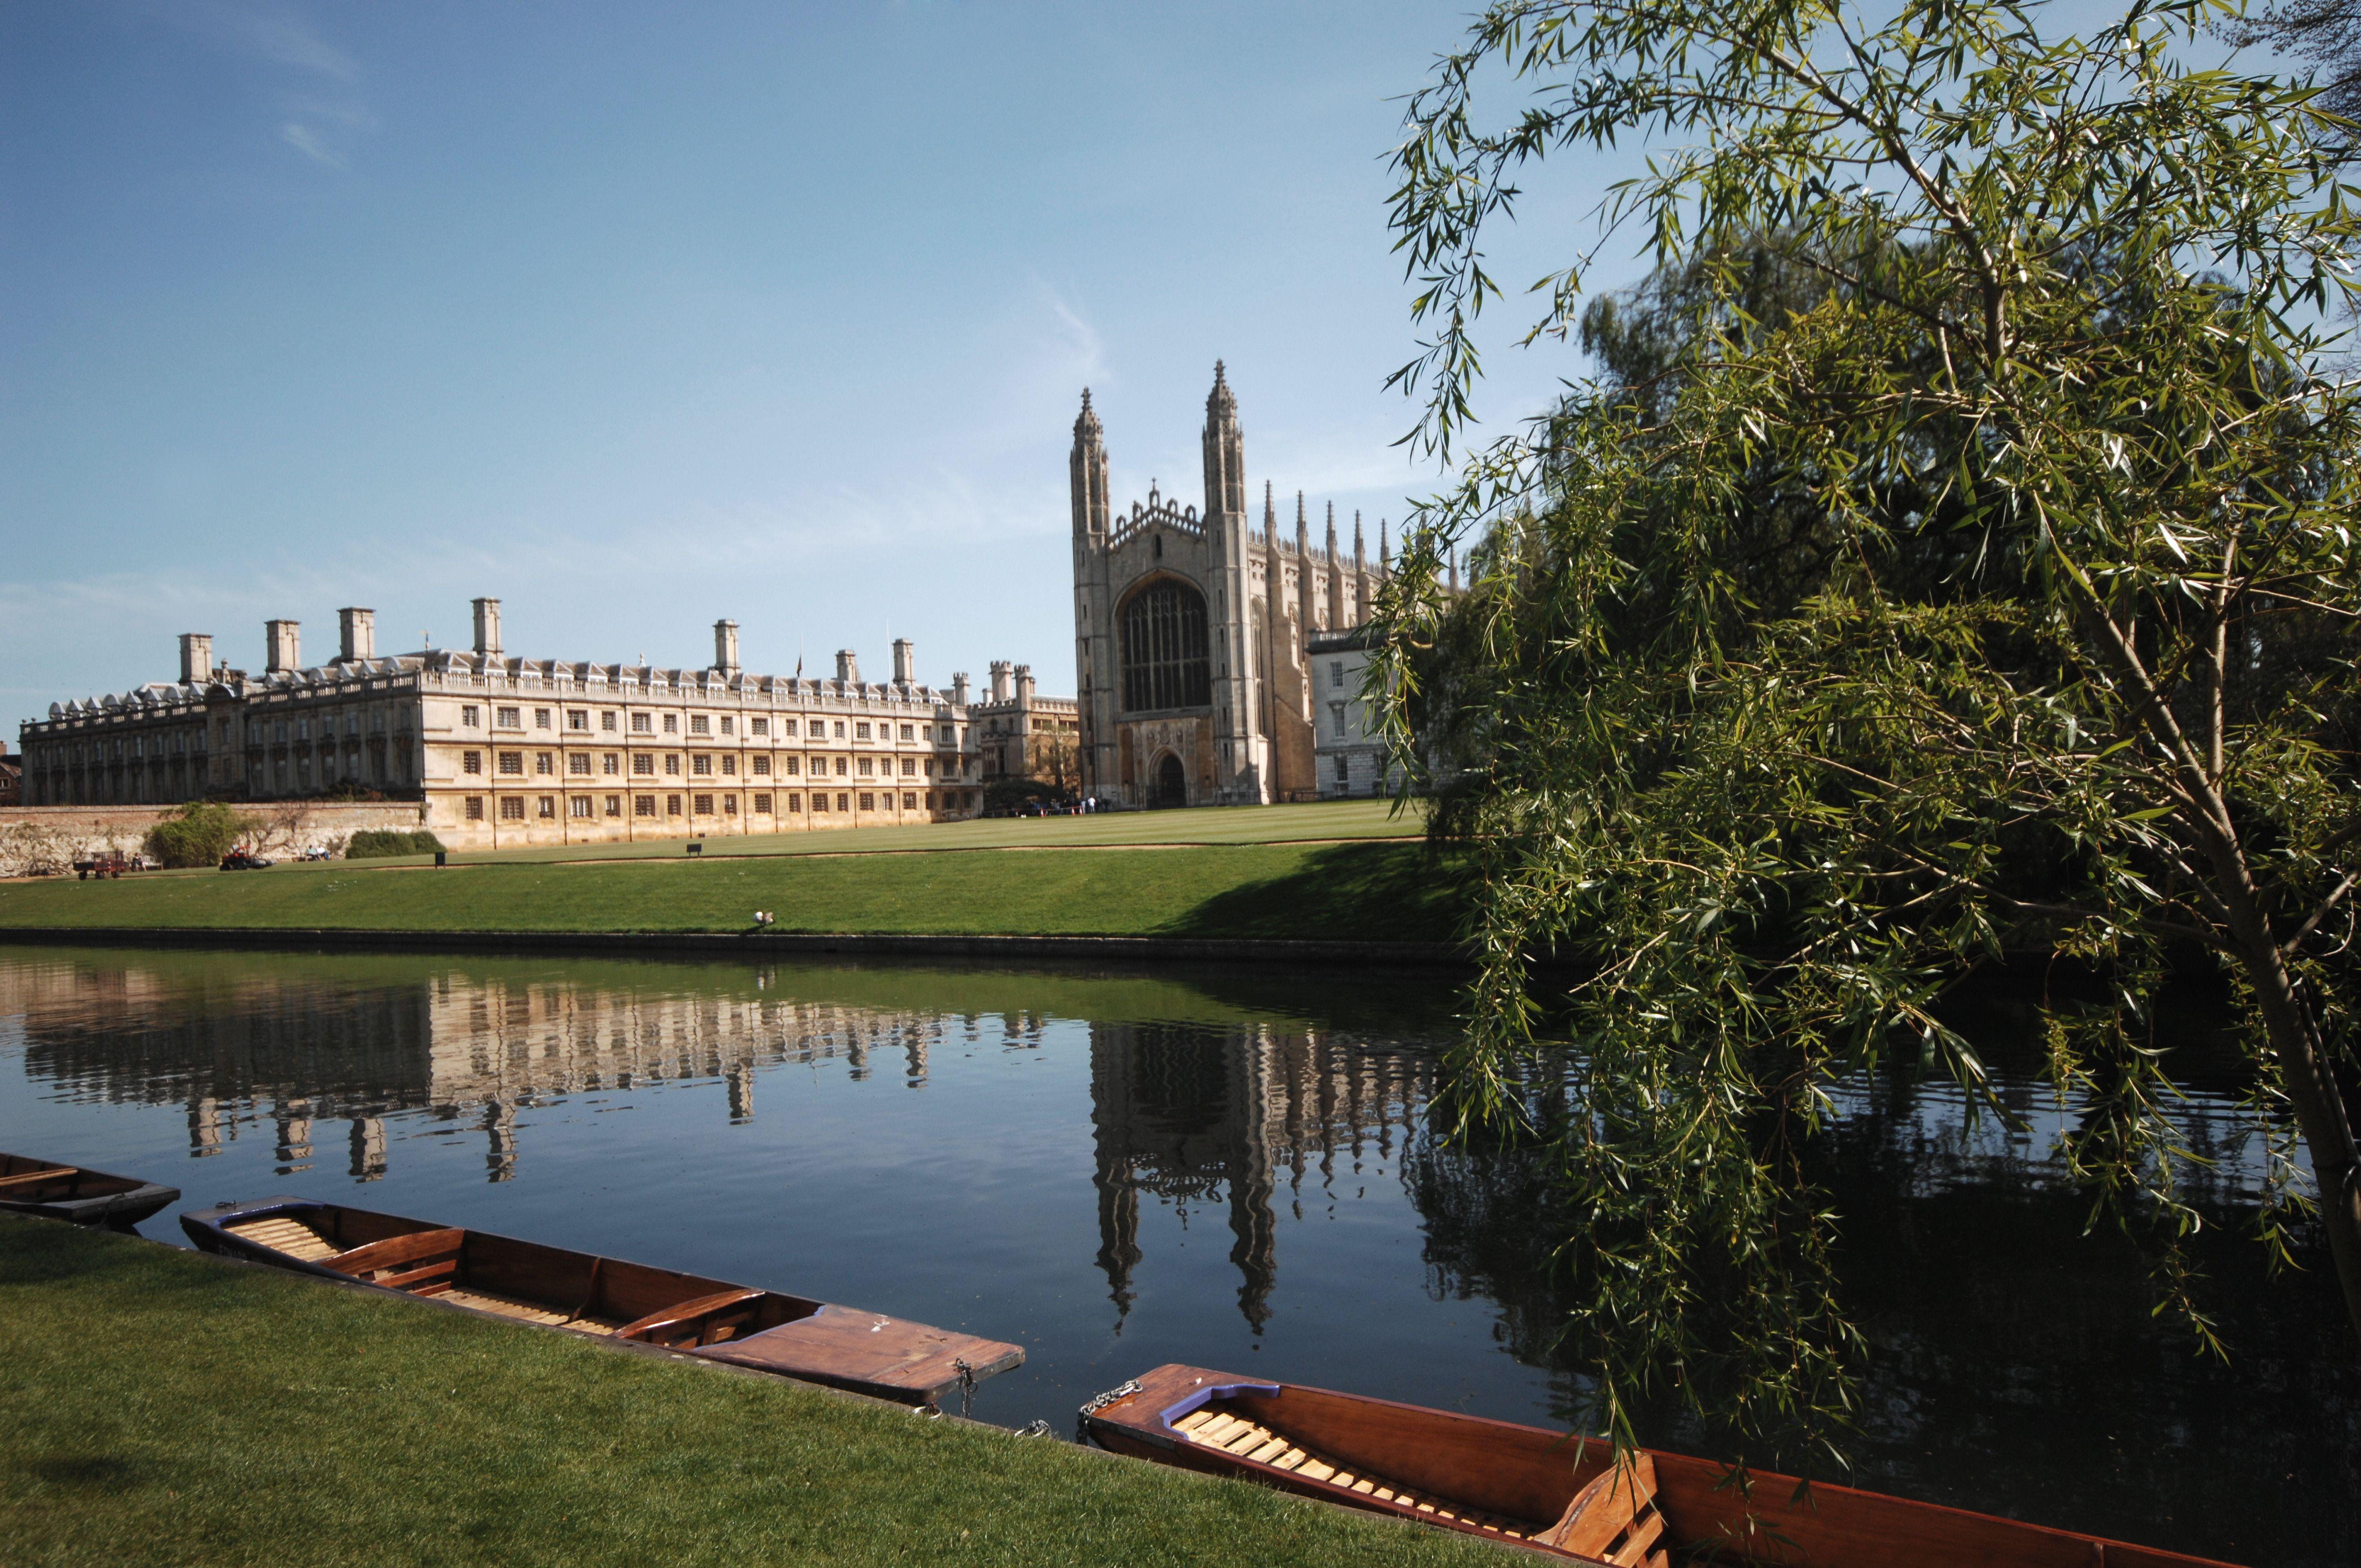 Sunday Photo: A Lovely Photo of the River Cam and King's College